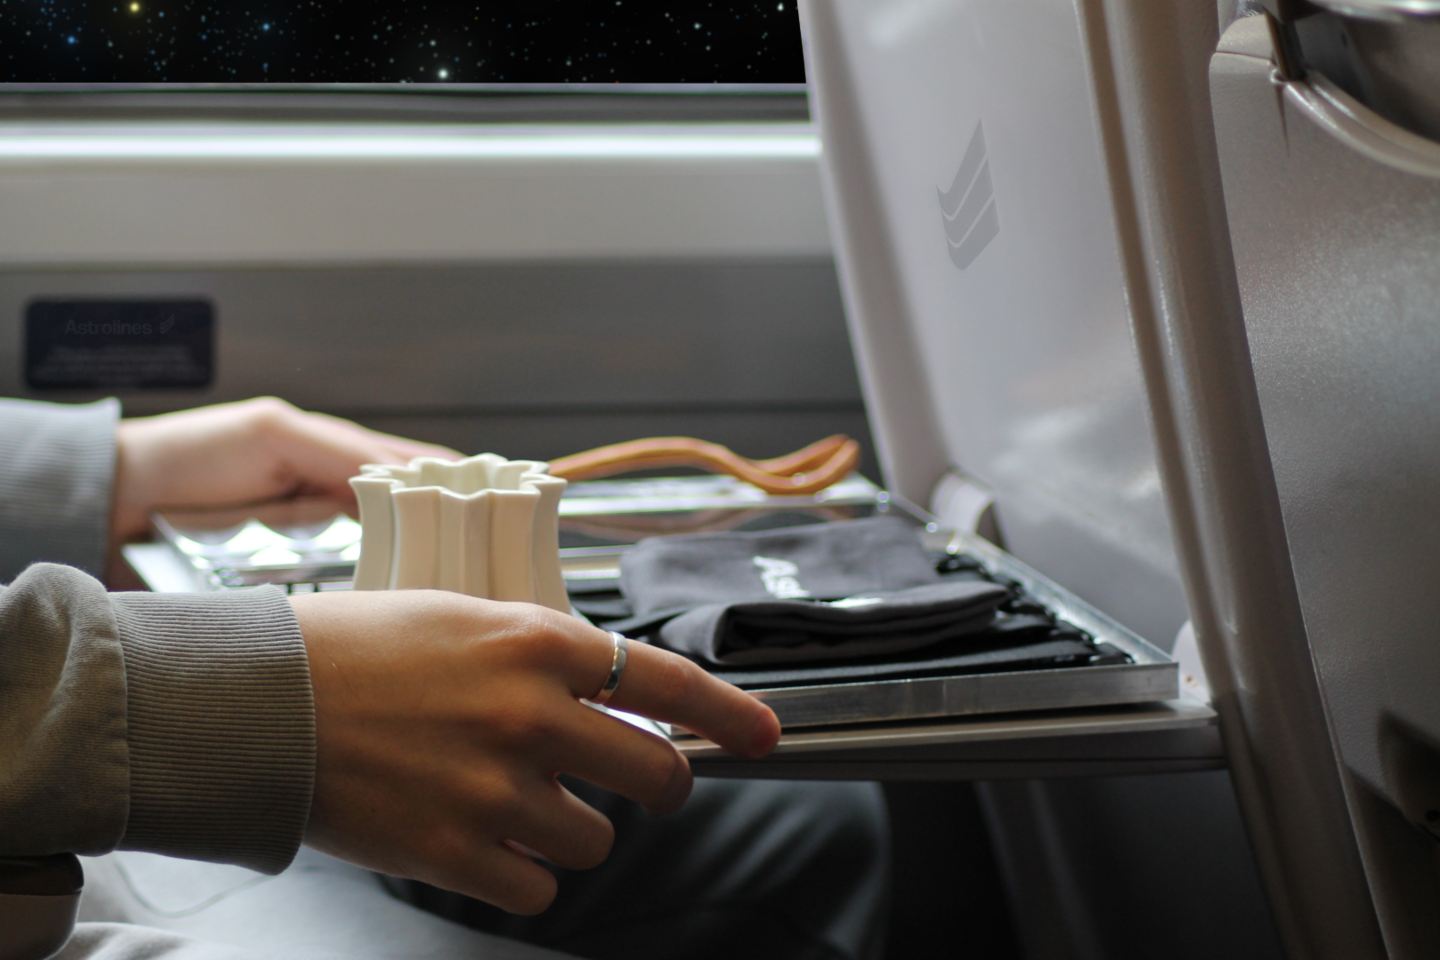 Person sitting down on a space-ship. Astro-Tray in front of them on tray table.